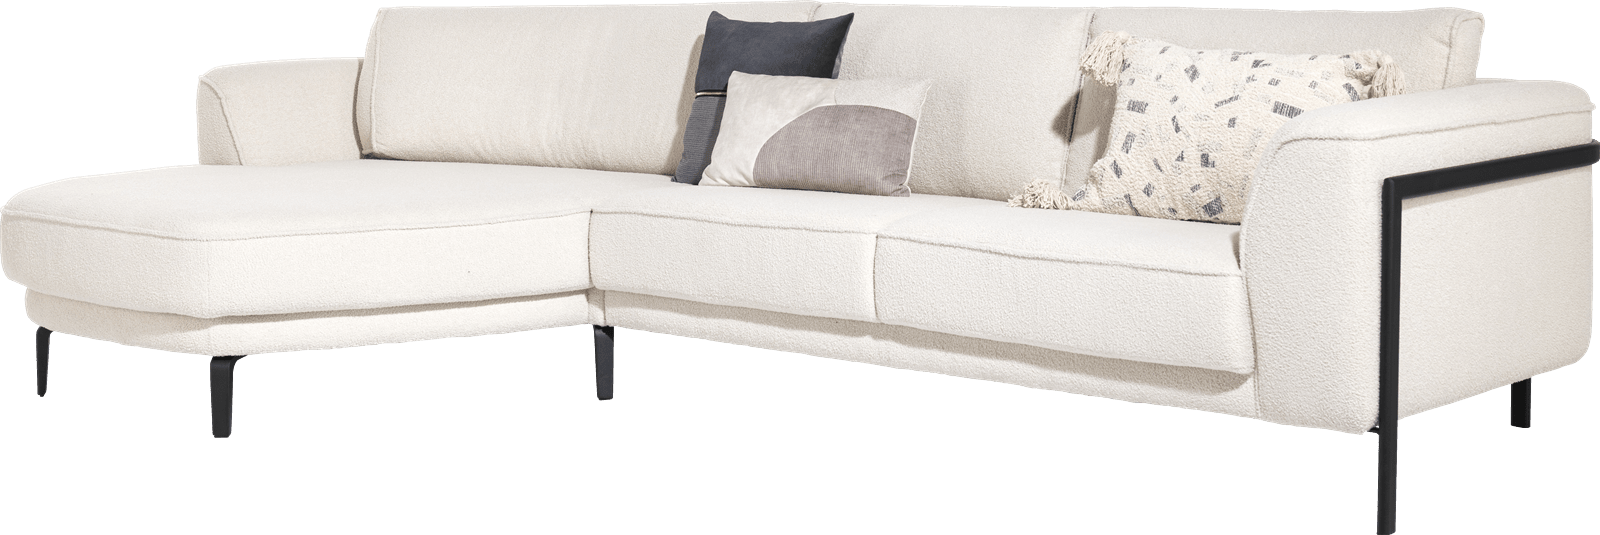 Henders and Hazel - Langley - Sofas - 2,5 Sitzer Armlehne rechts - Longchair curved links